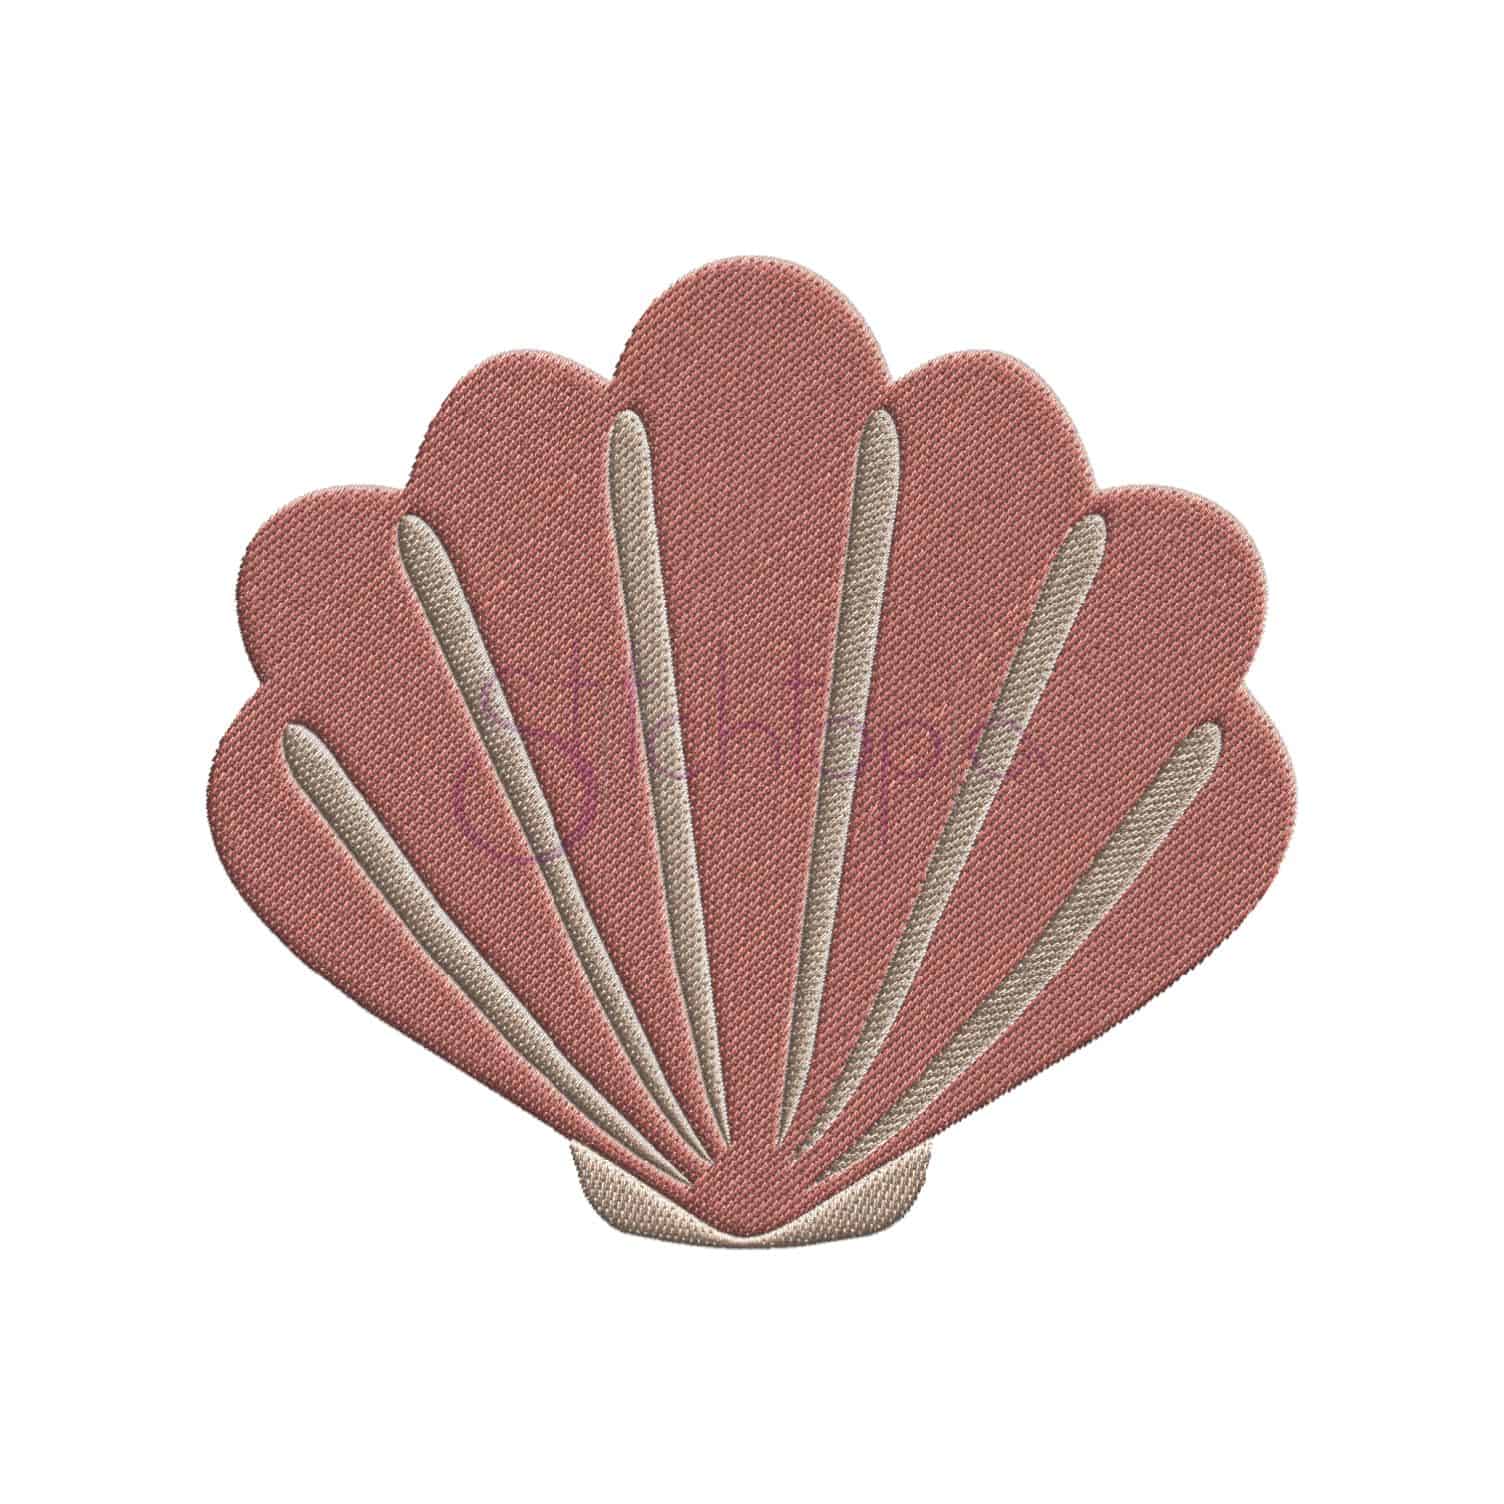 Shell logo embroidery design